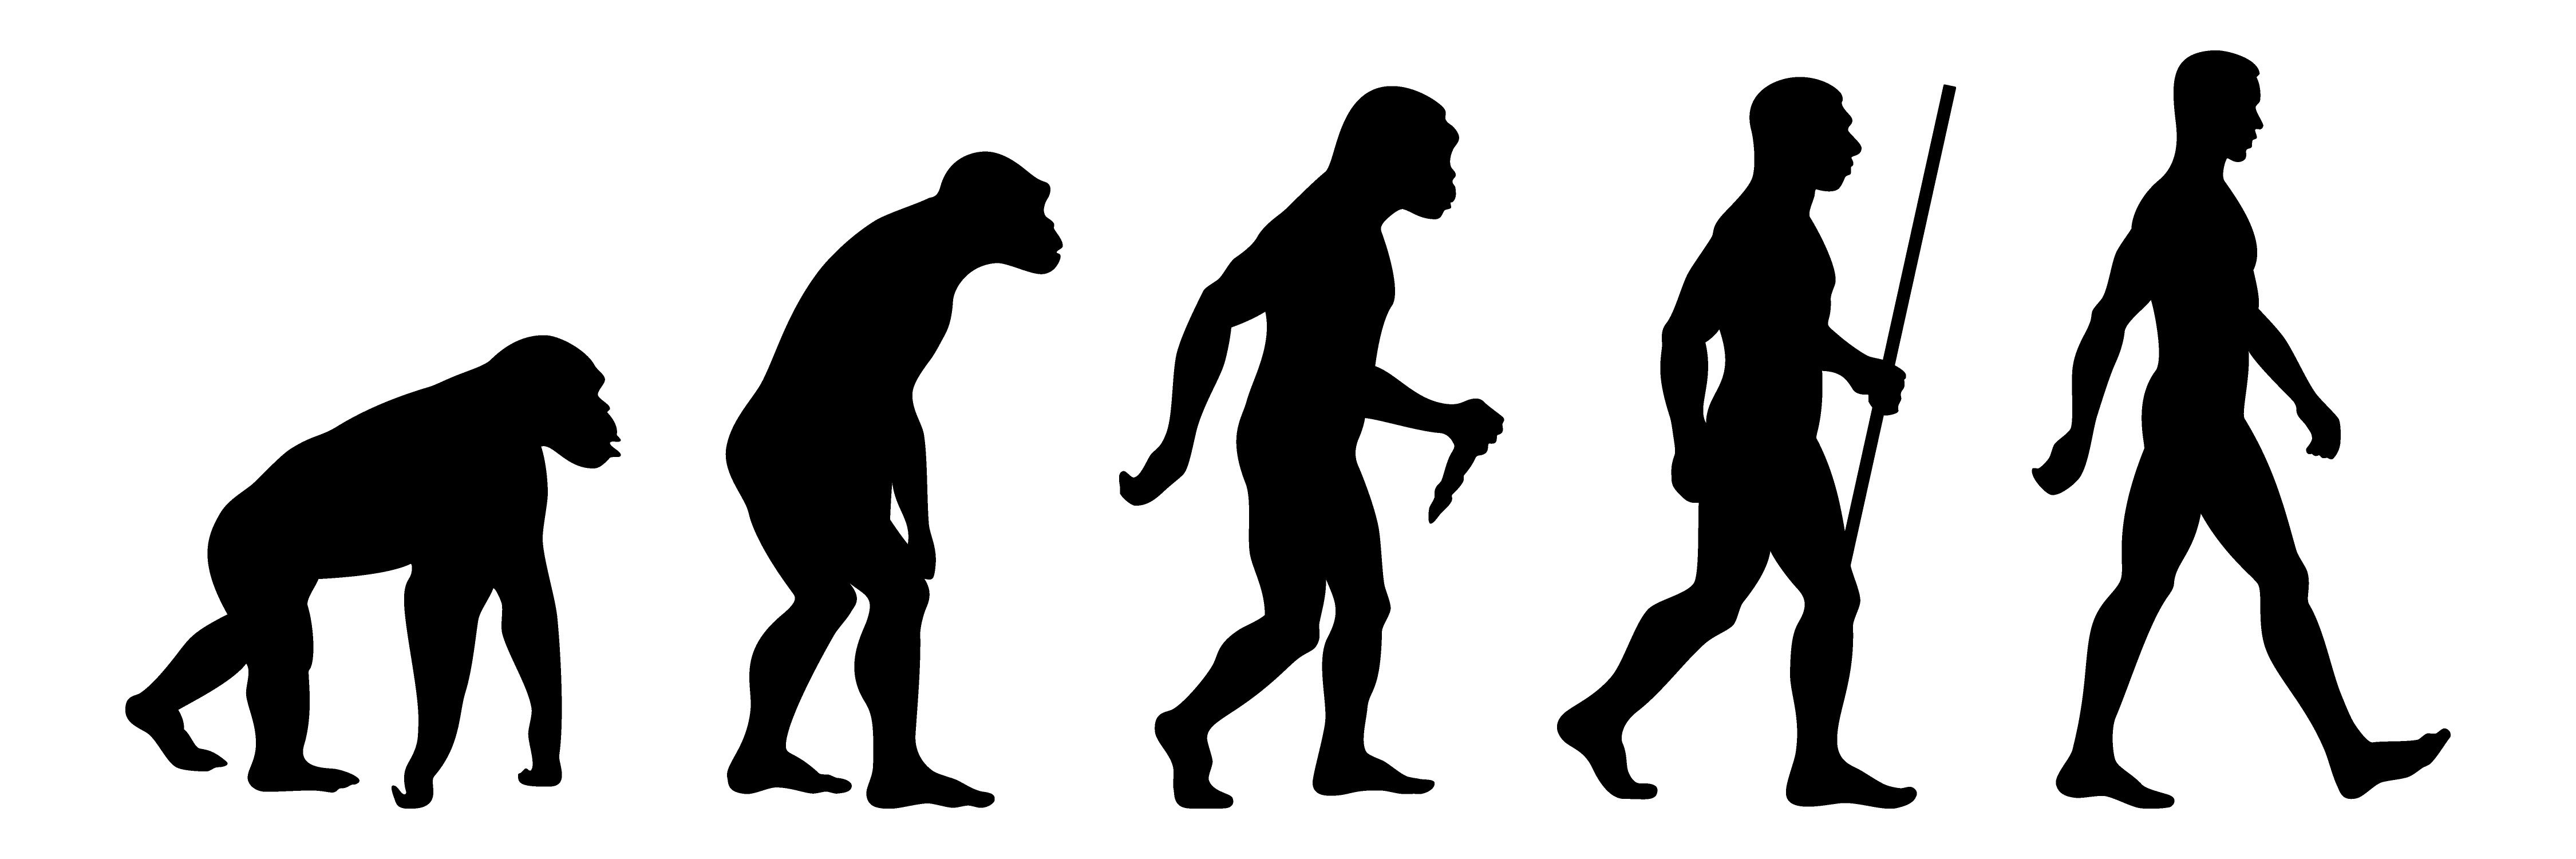 Black and white depiction of evolution, from primates to humans